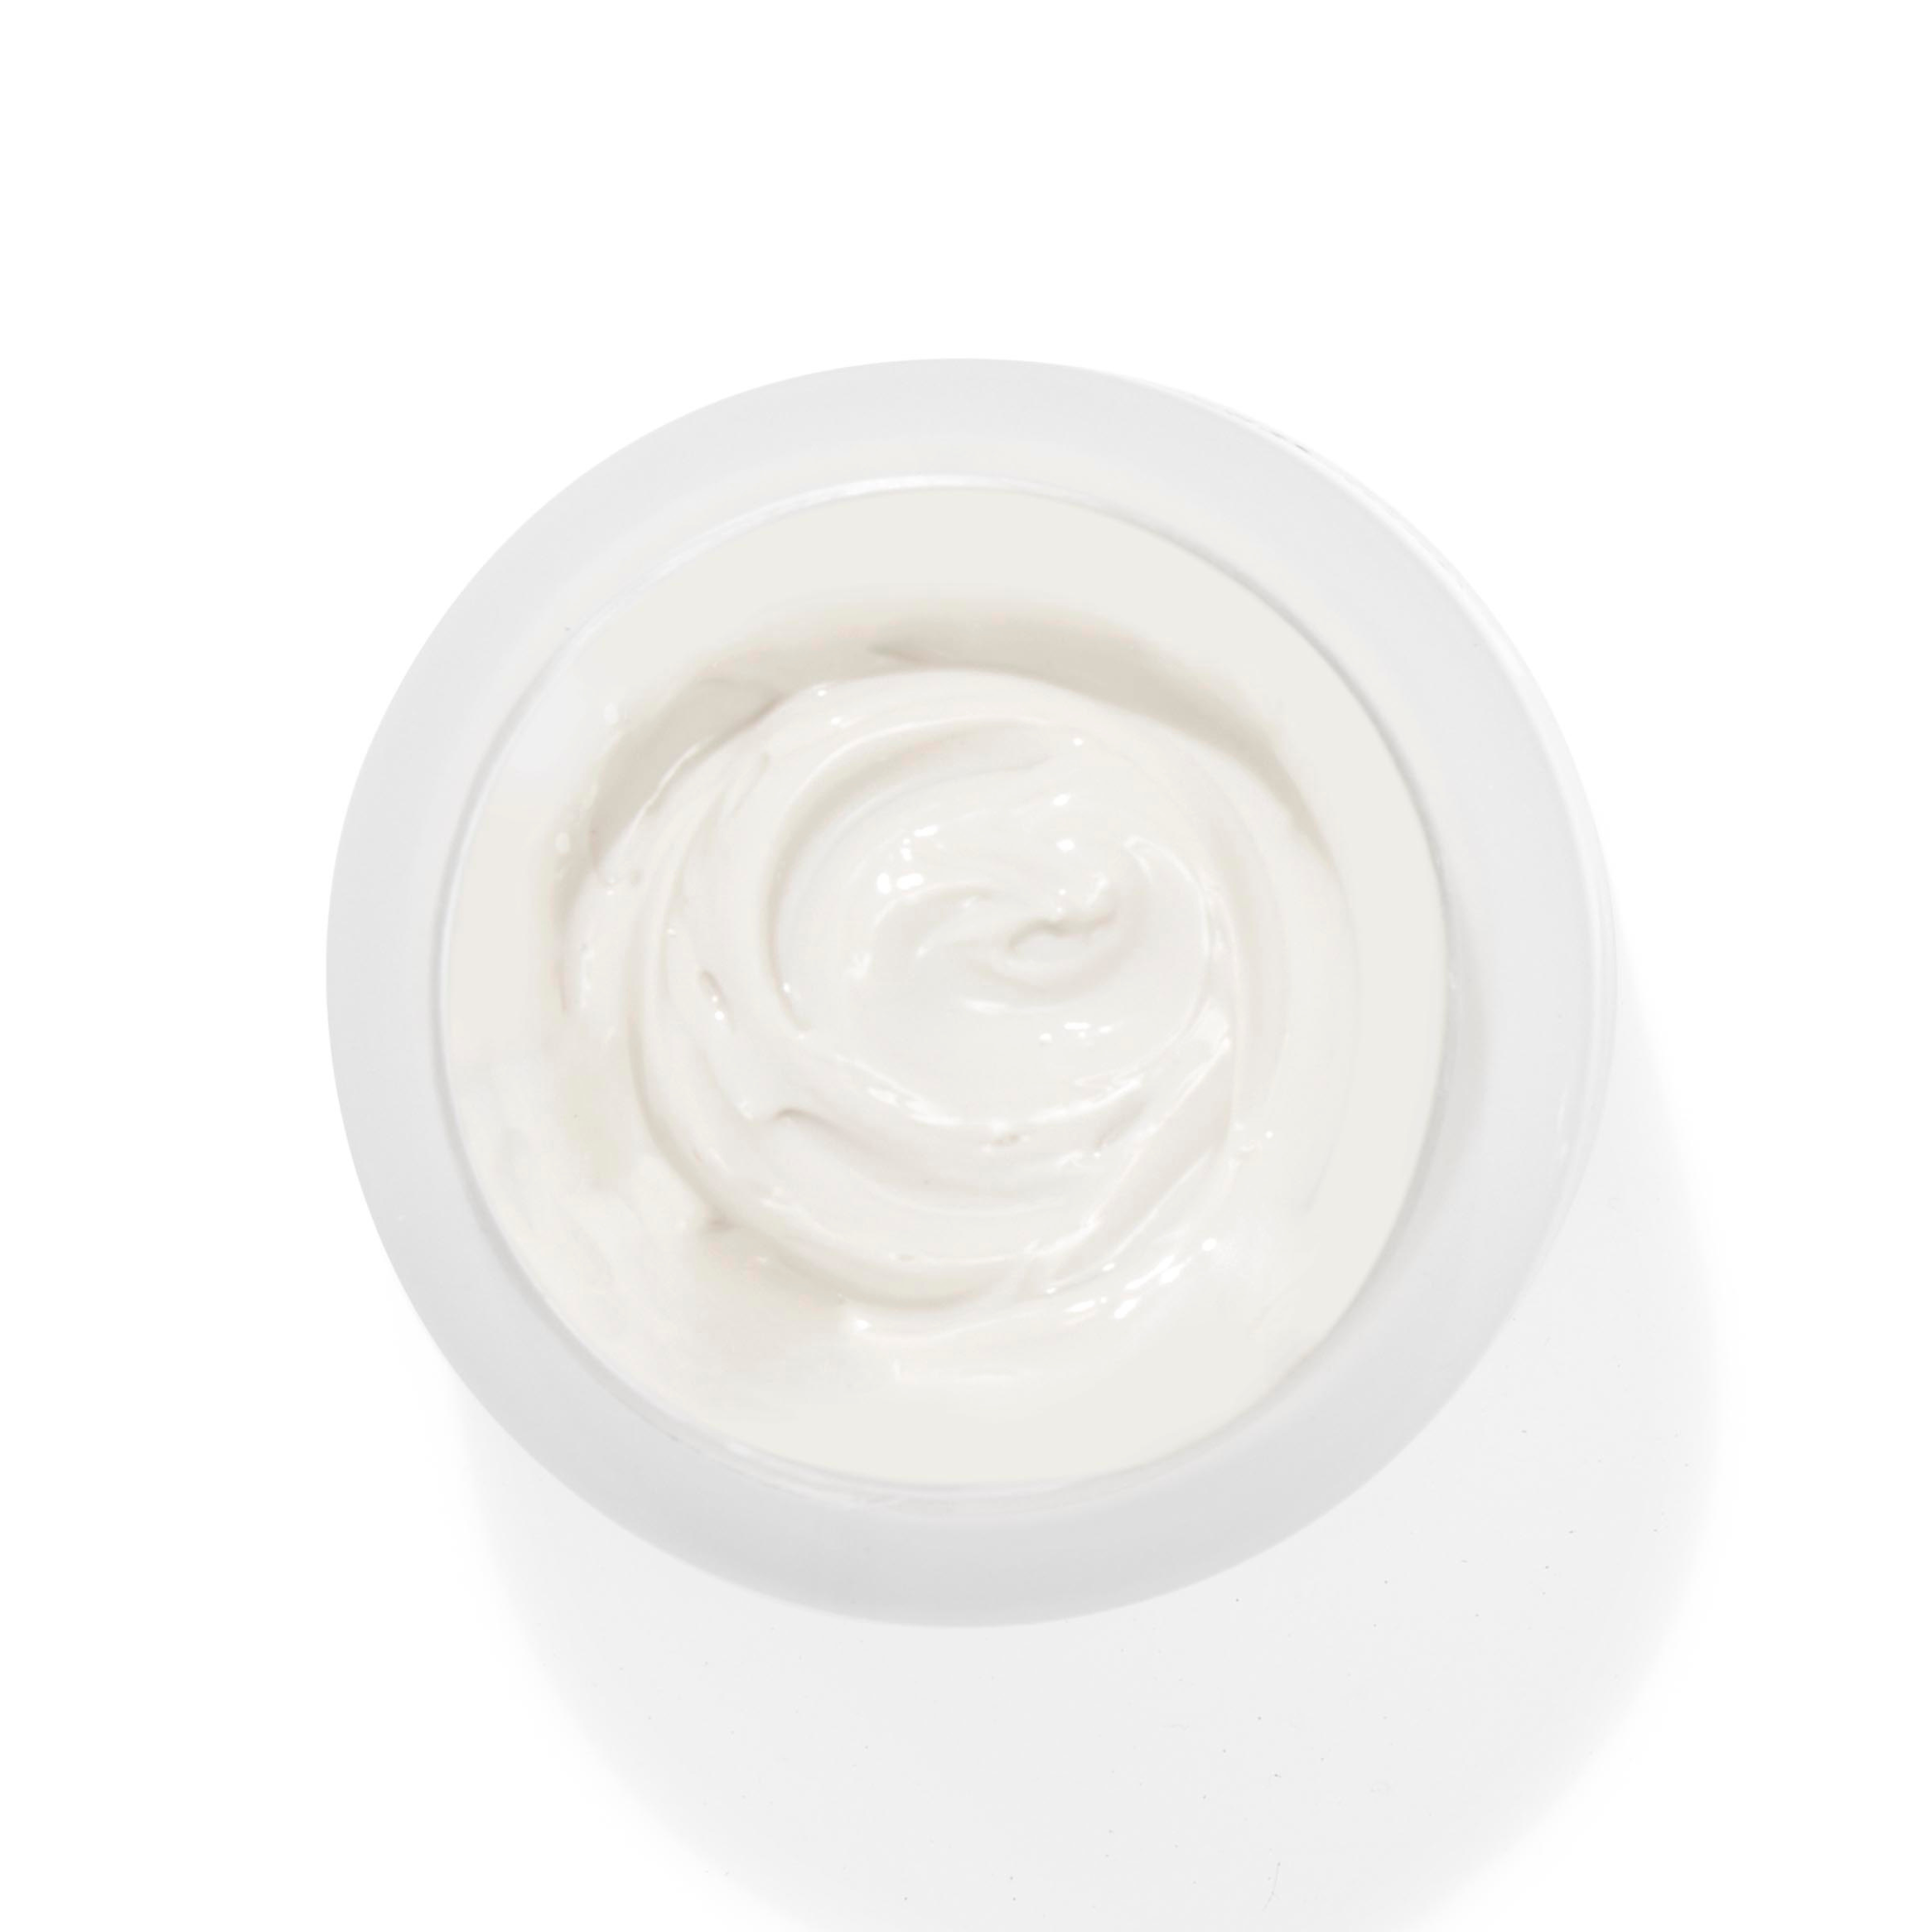 RADIANT Resurfacing &amp; Firming Clay Mask